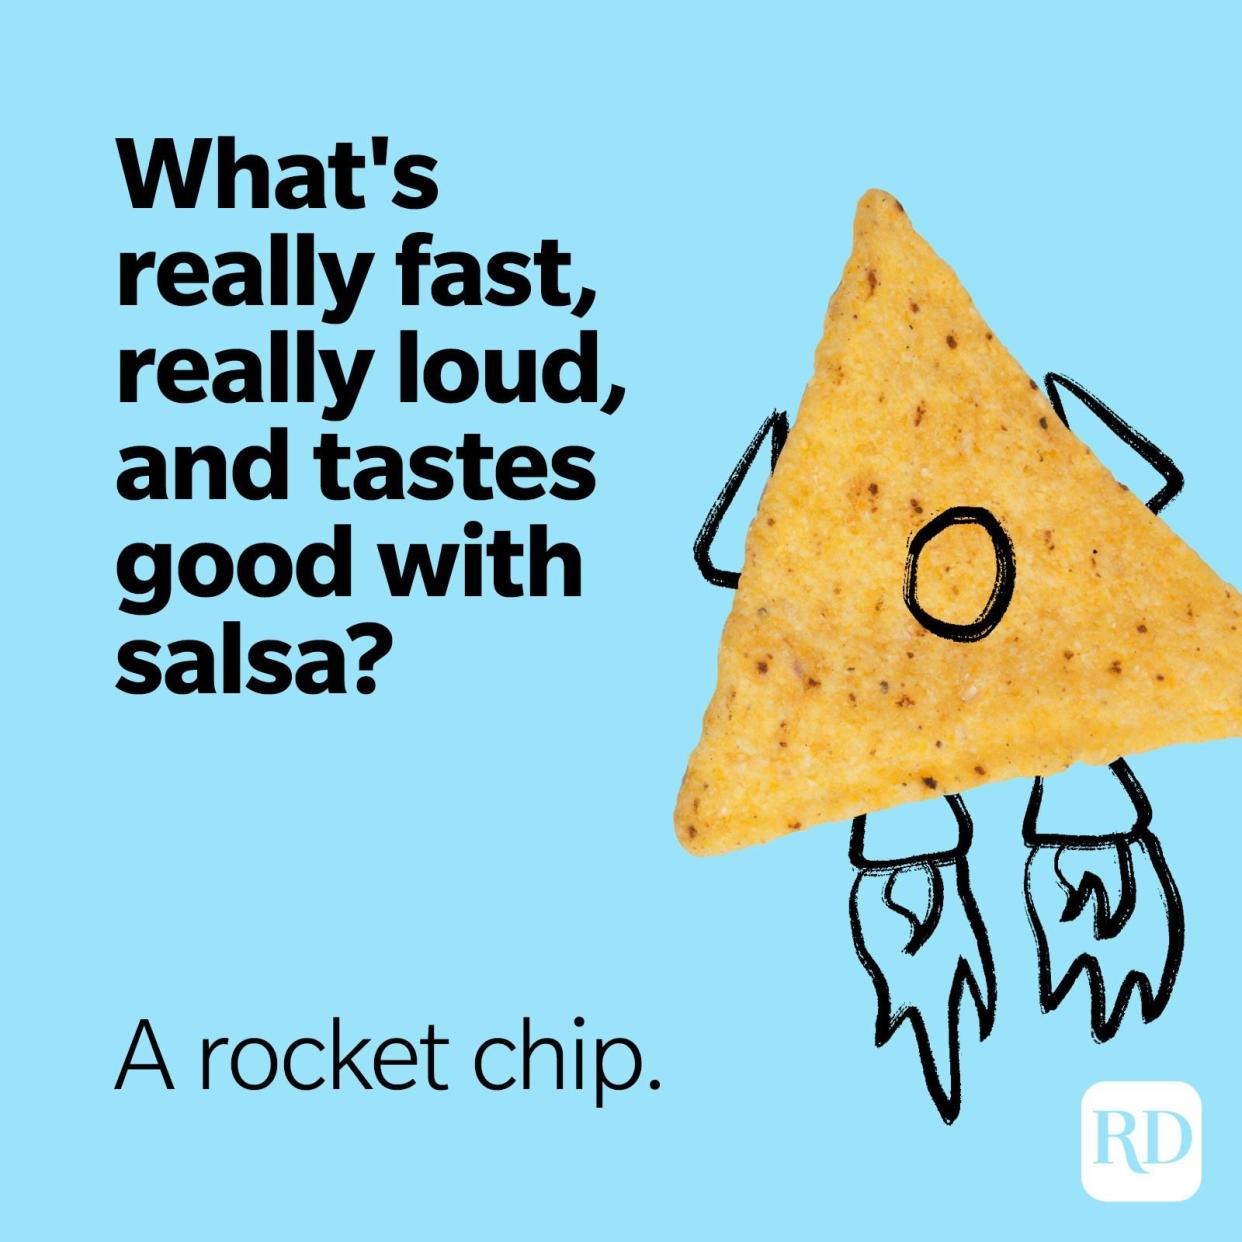 11. What's really fast, really loud, and tastes good with salsa? A rocket chip.